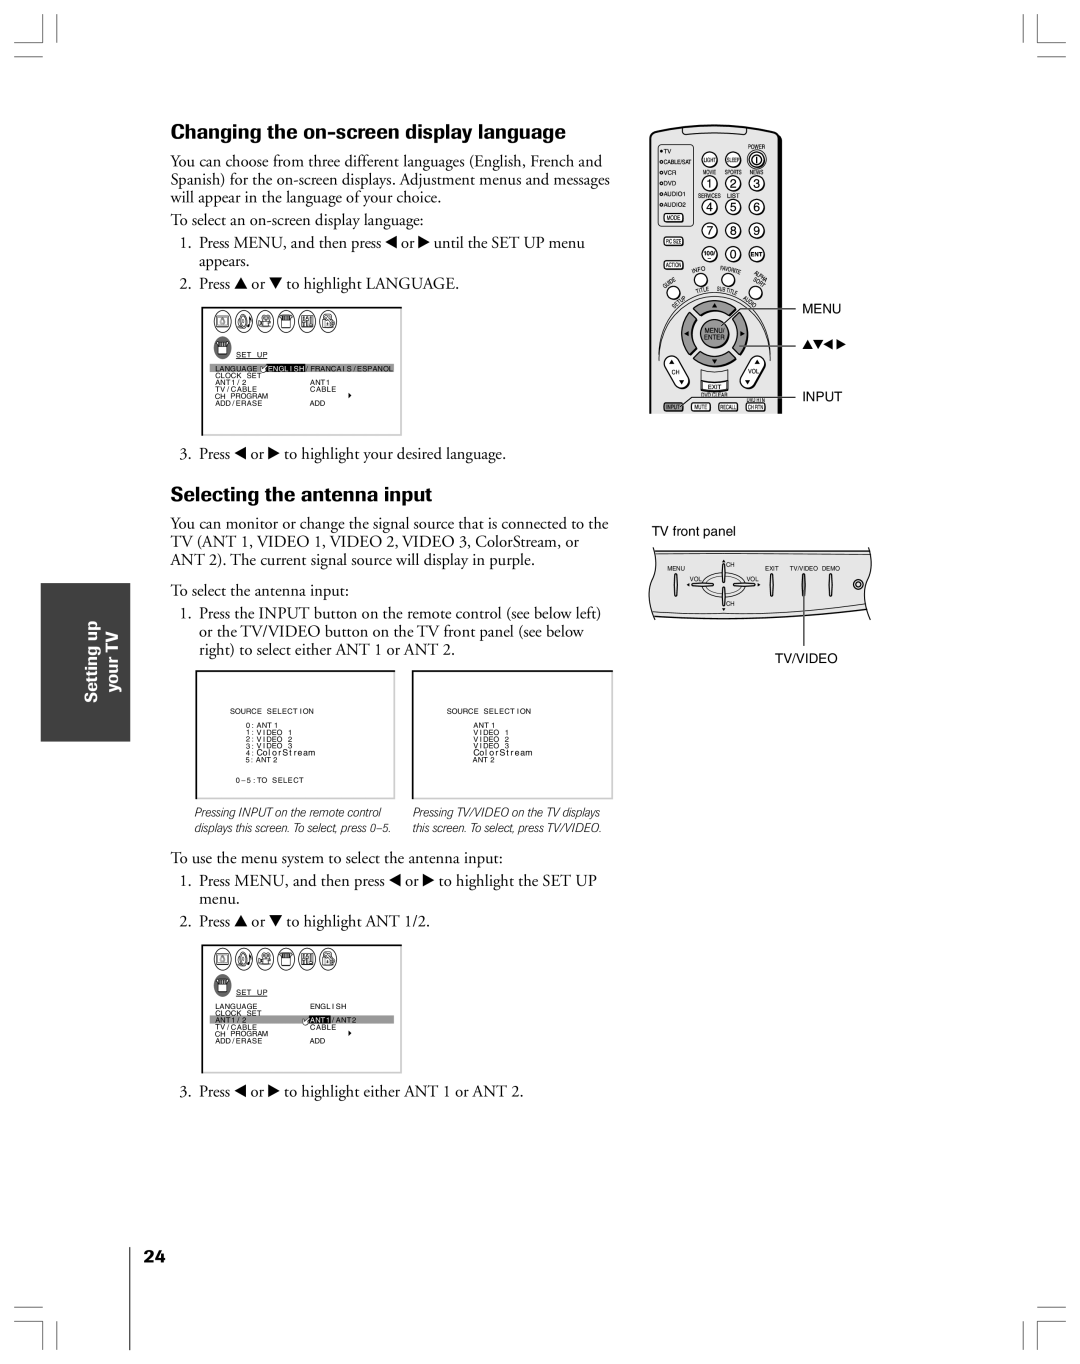 Toshiba 53AX62 owner manual Changing the on-screen display language, Selecting the antenna input, up TV 